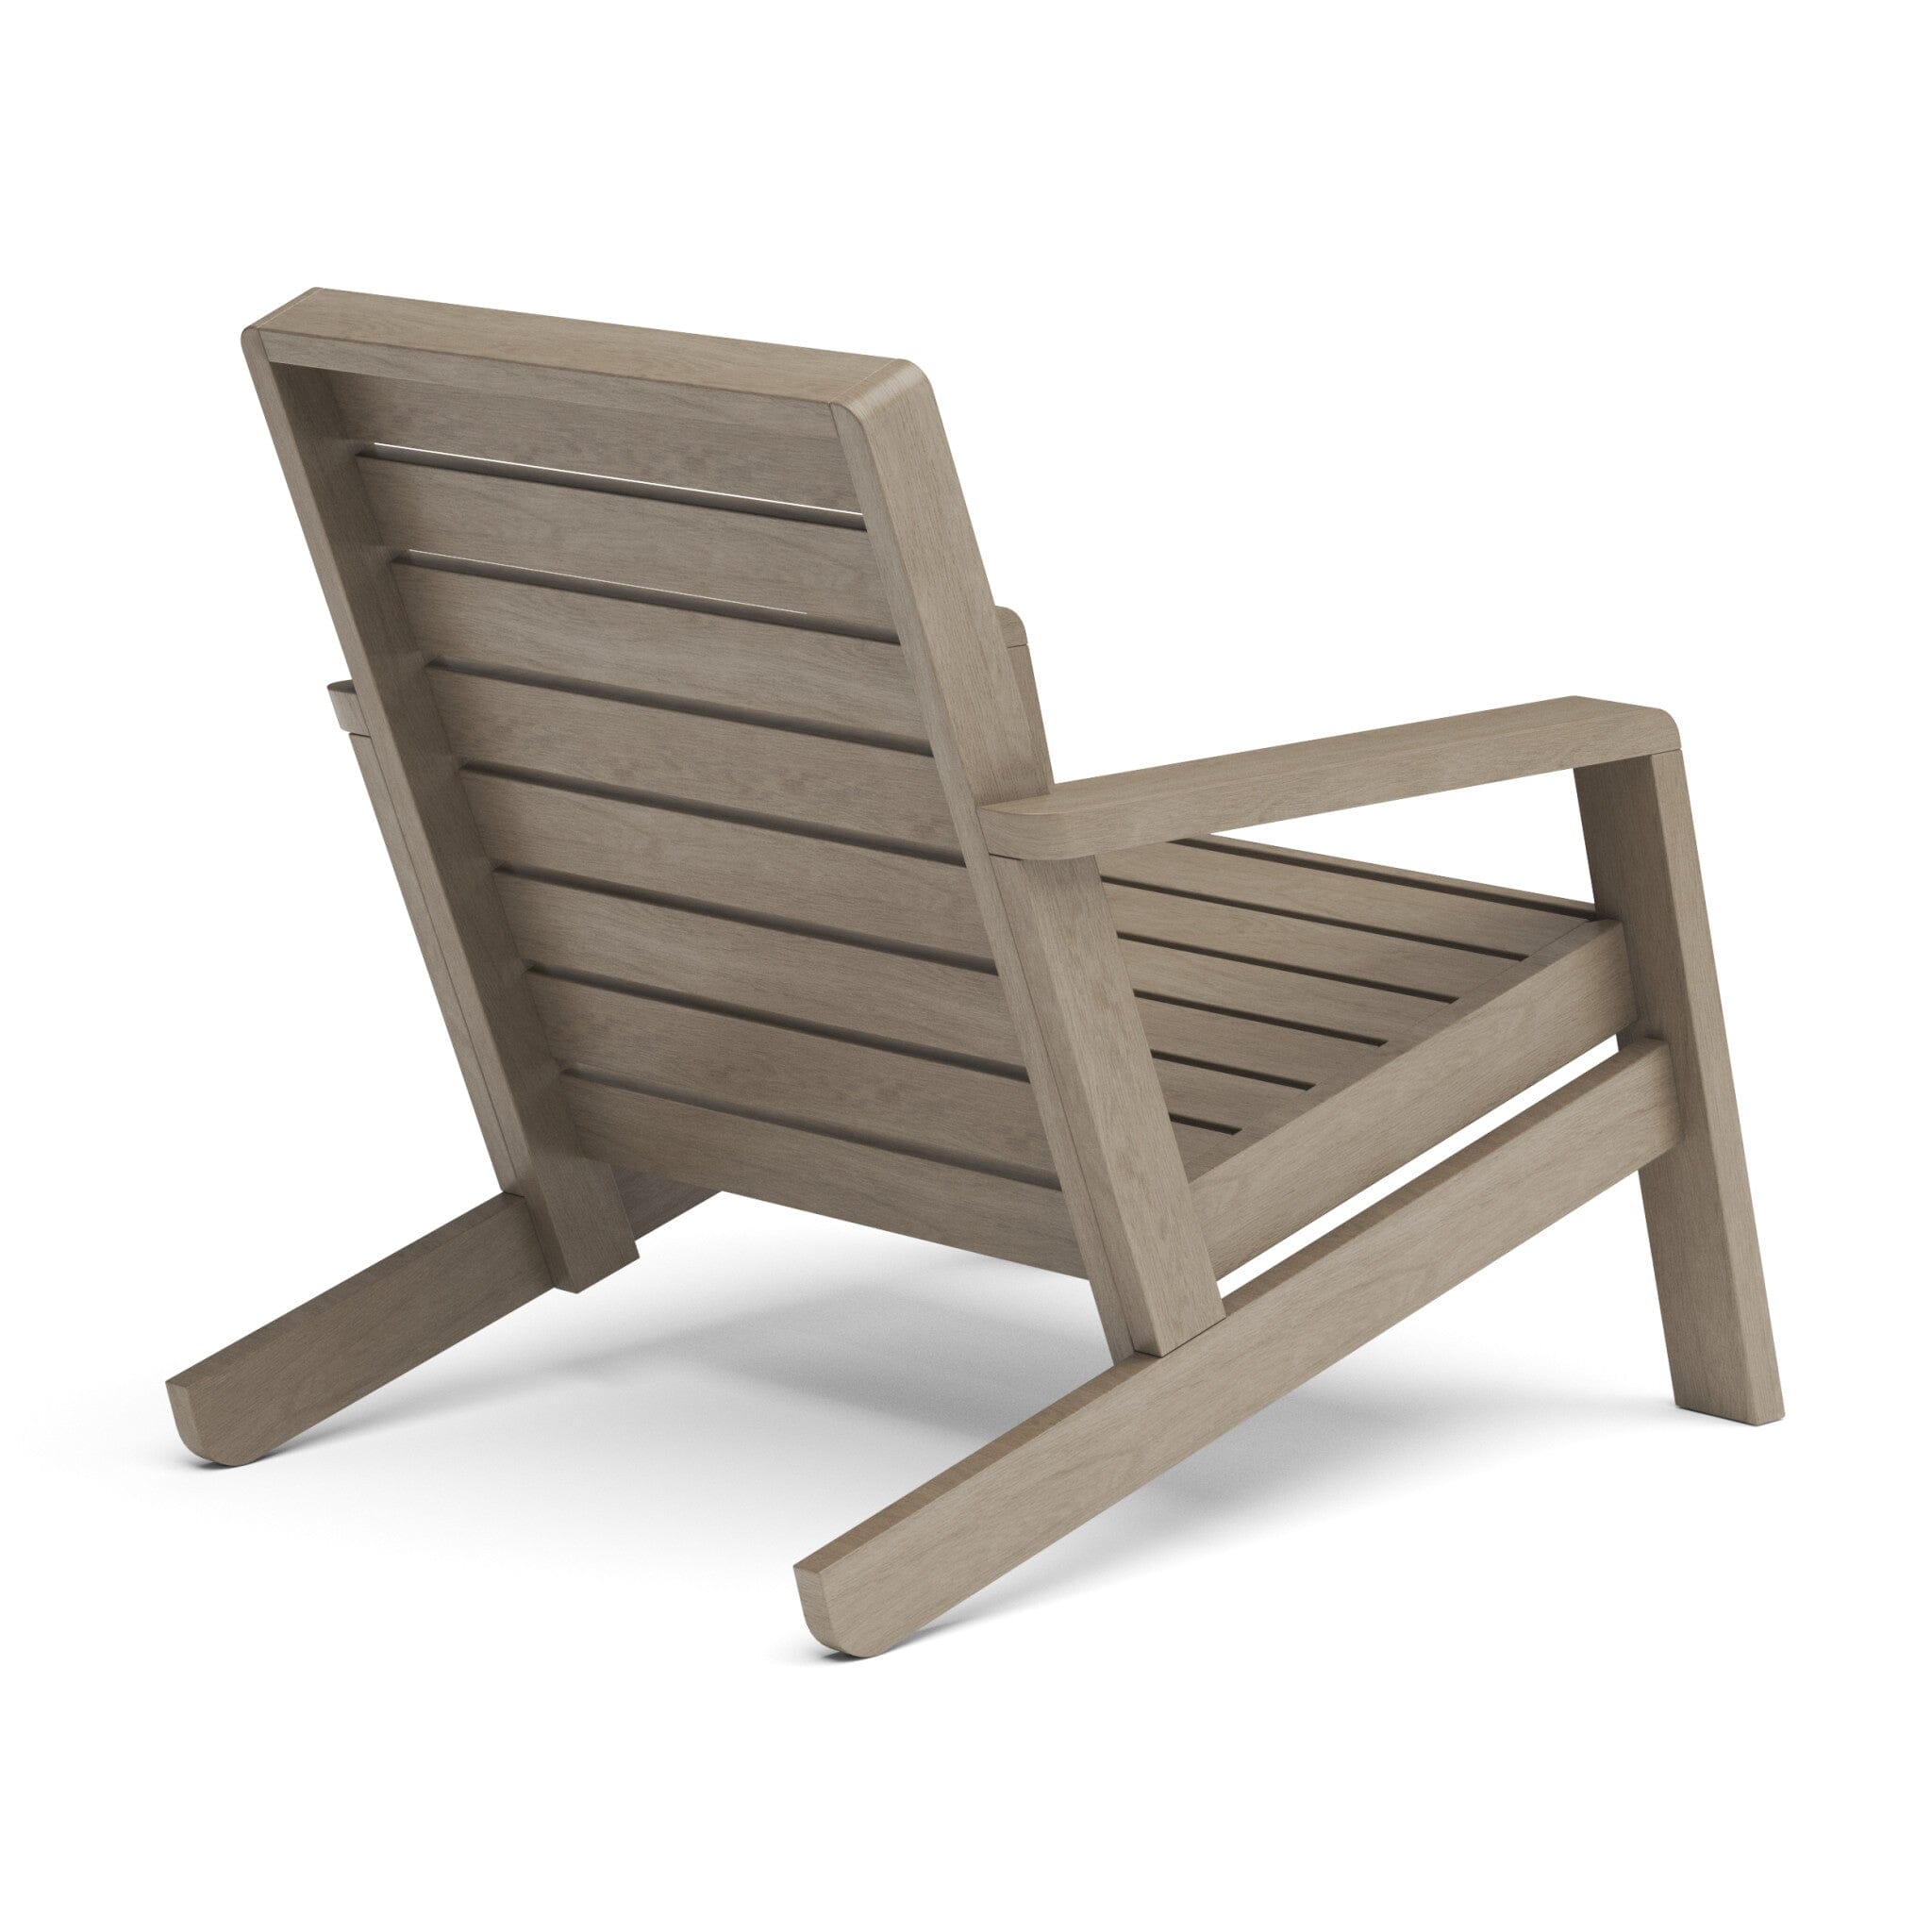 Transitional Outdoor Lounge Chair By Sustain Outdoor Chair Sustain